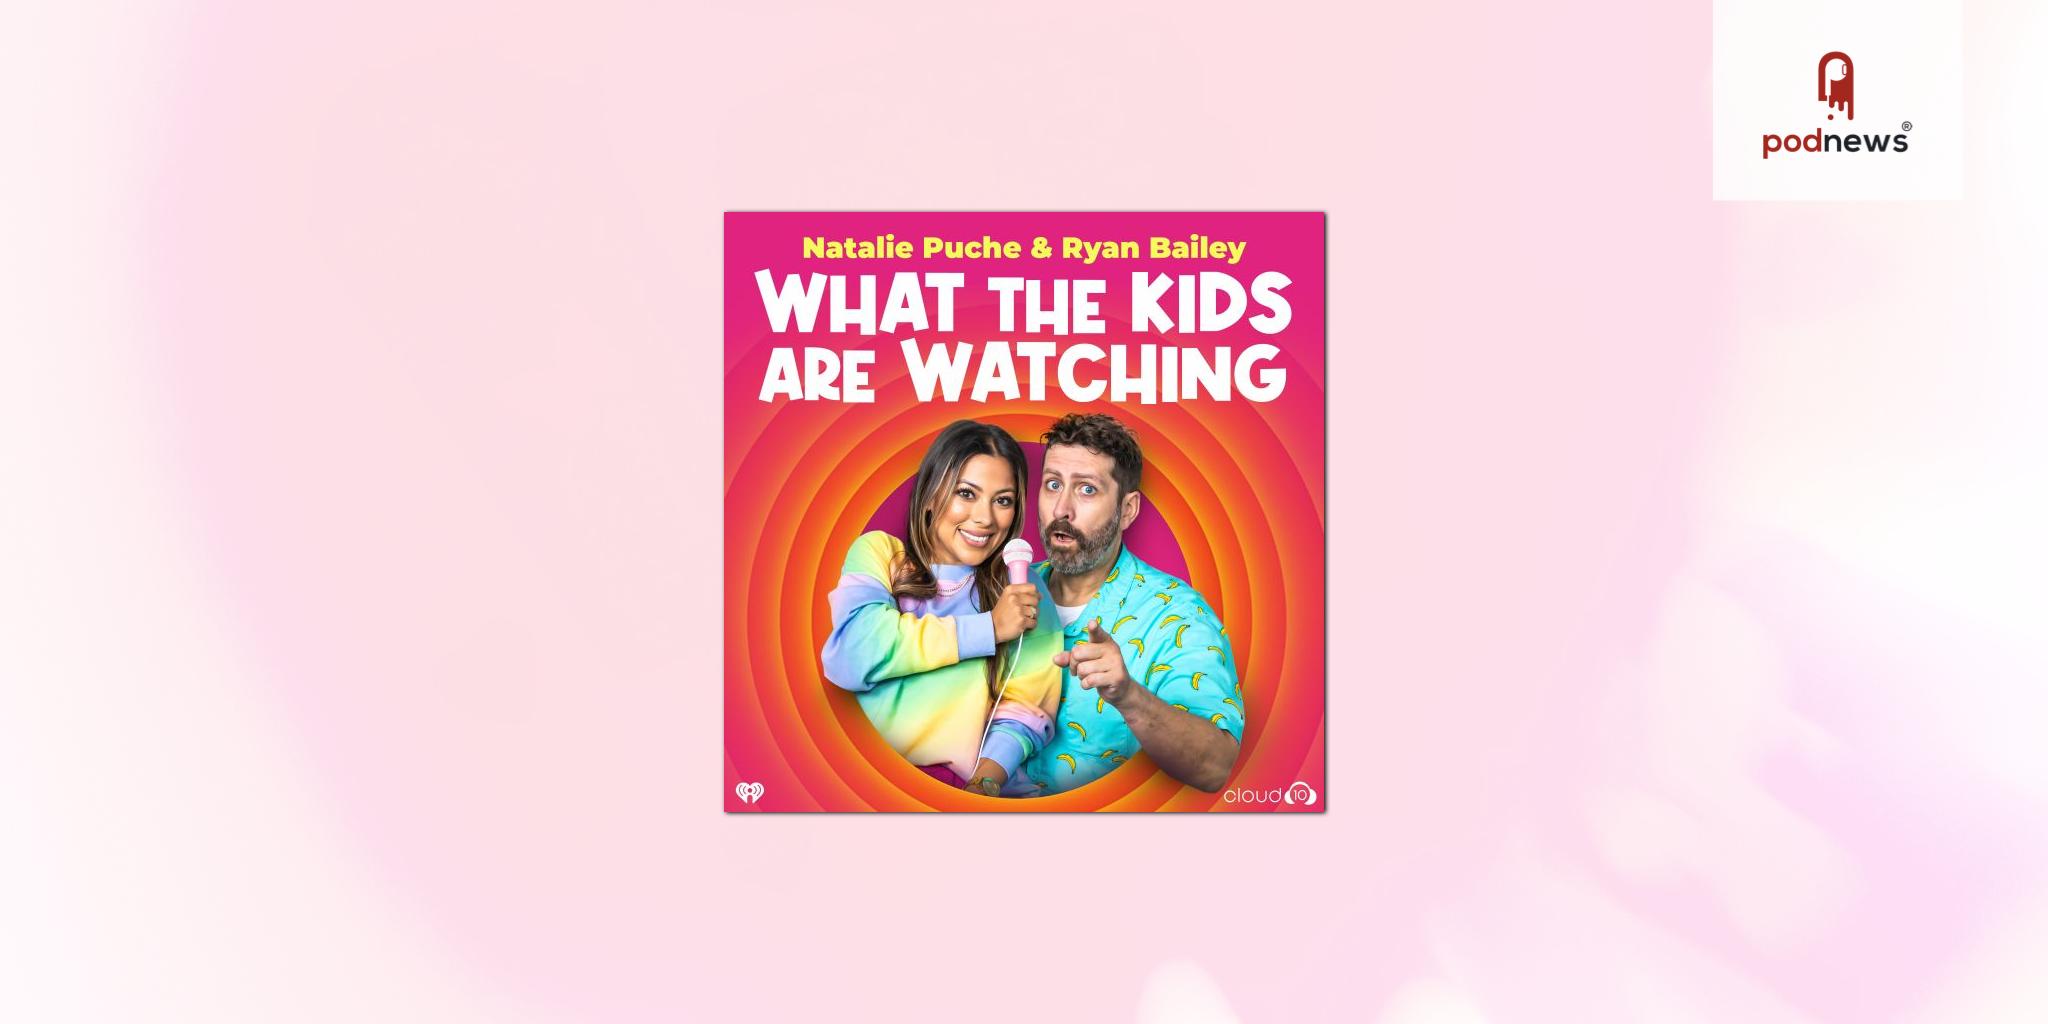 Ryan Bailey and Natalie Puche Talk Popular Children Shows on New Cloud10 Podcast, “What the Kids Are Watching”